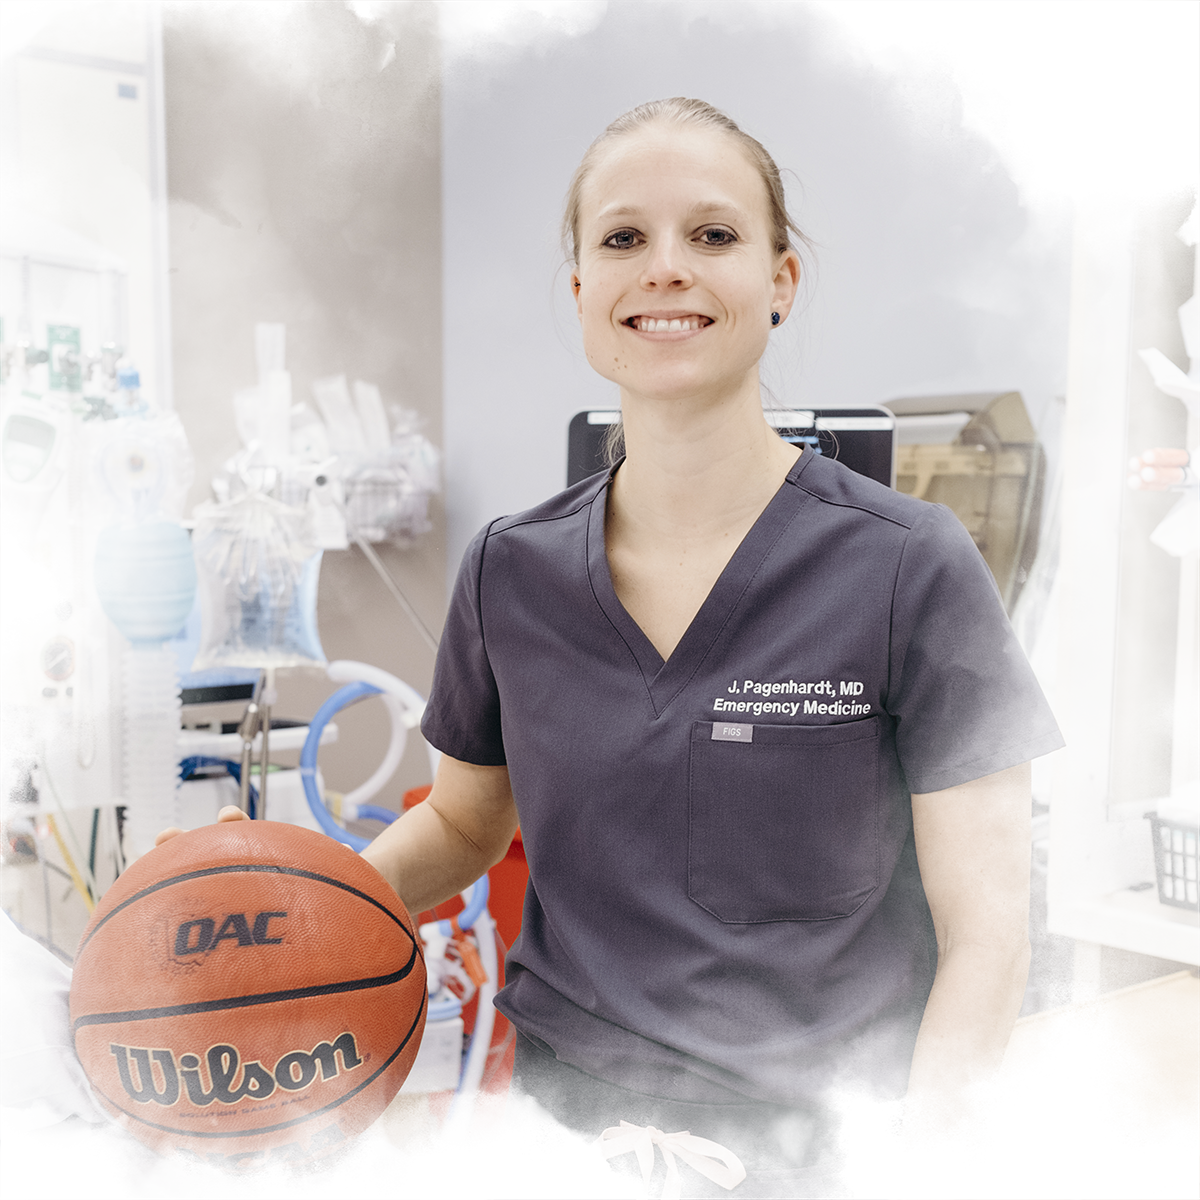 Justine Pagenhardt '08 poses with a basketball in the emergency room where she works